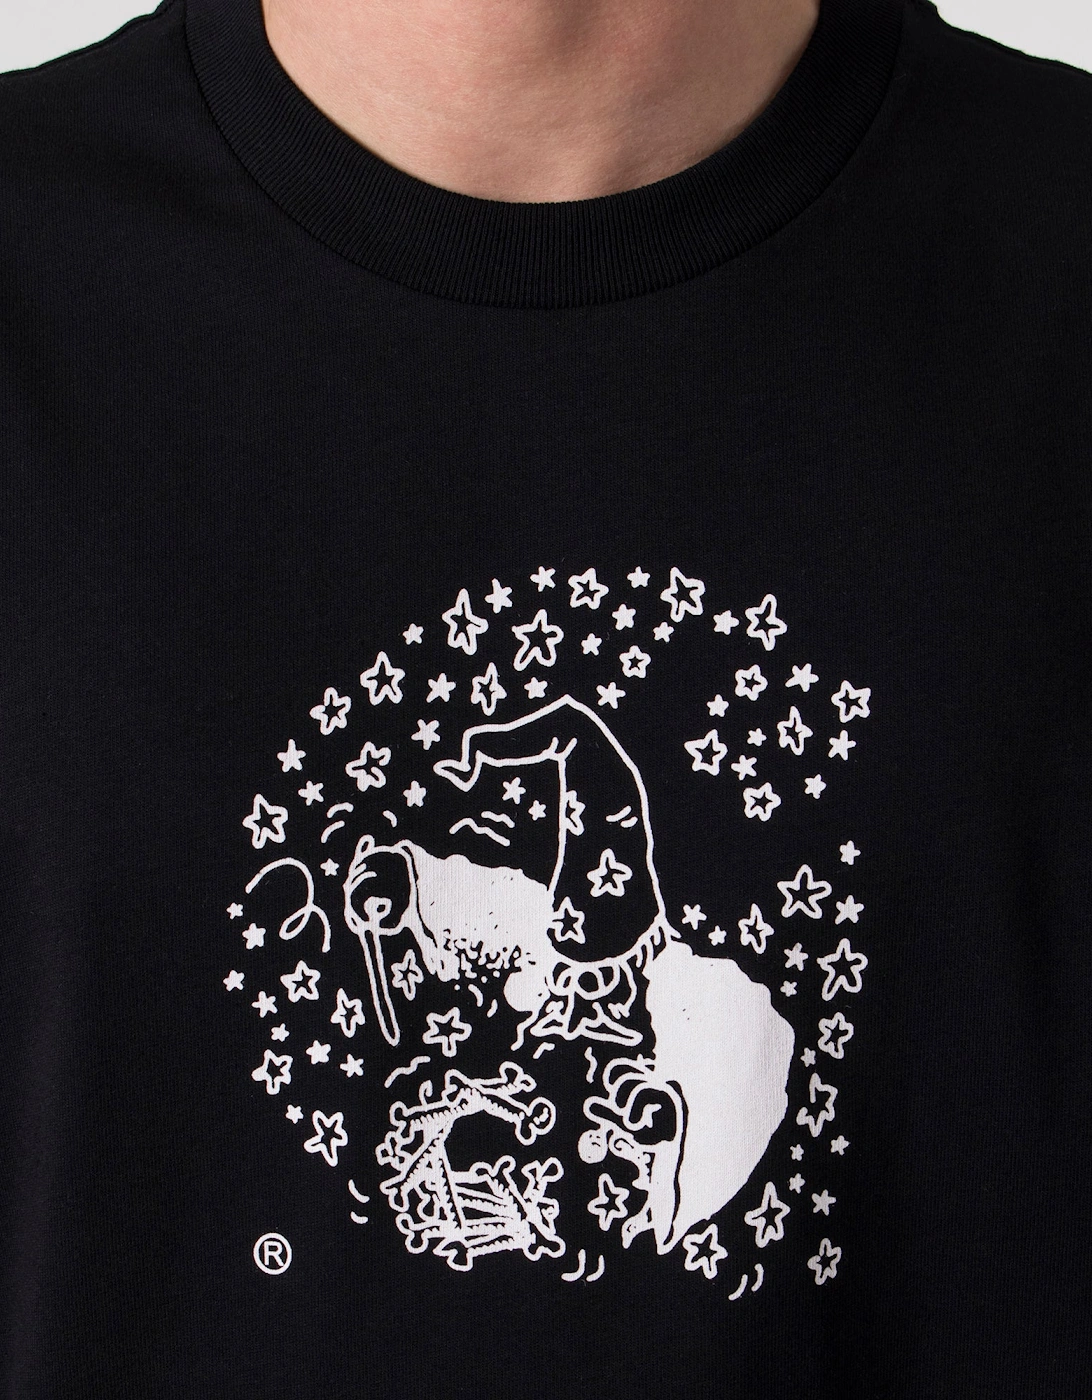 Relaxed Fit Hocus Pocus T-Shirt